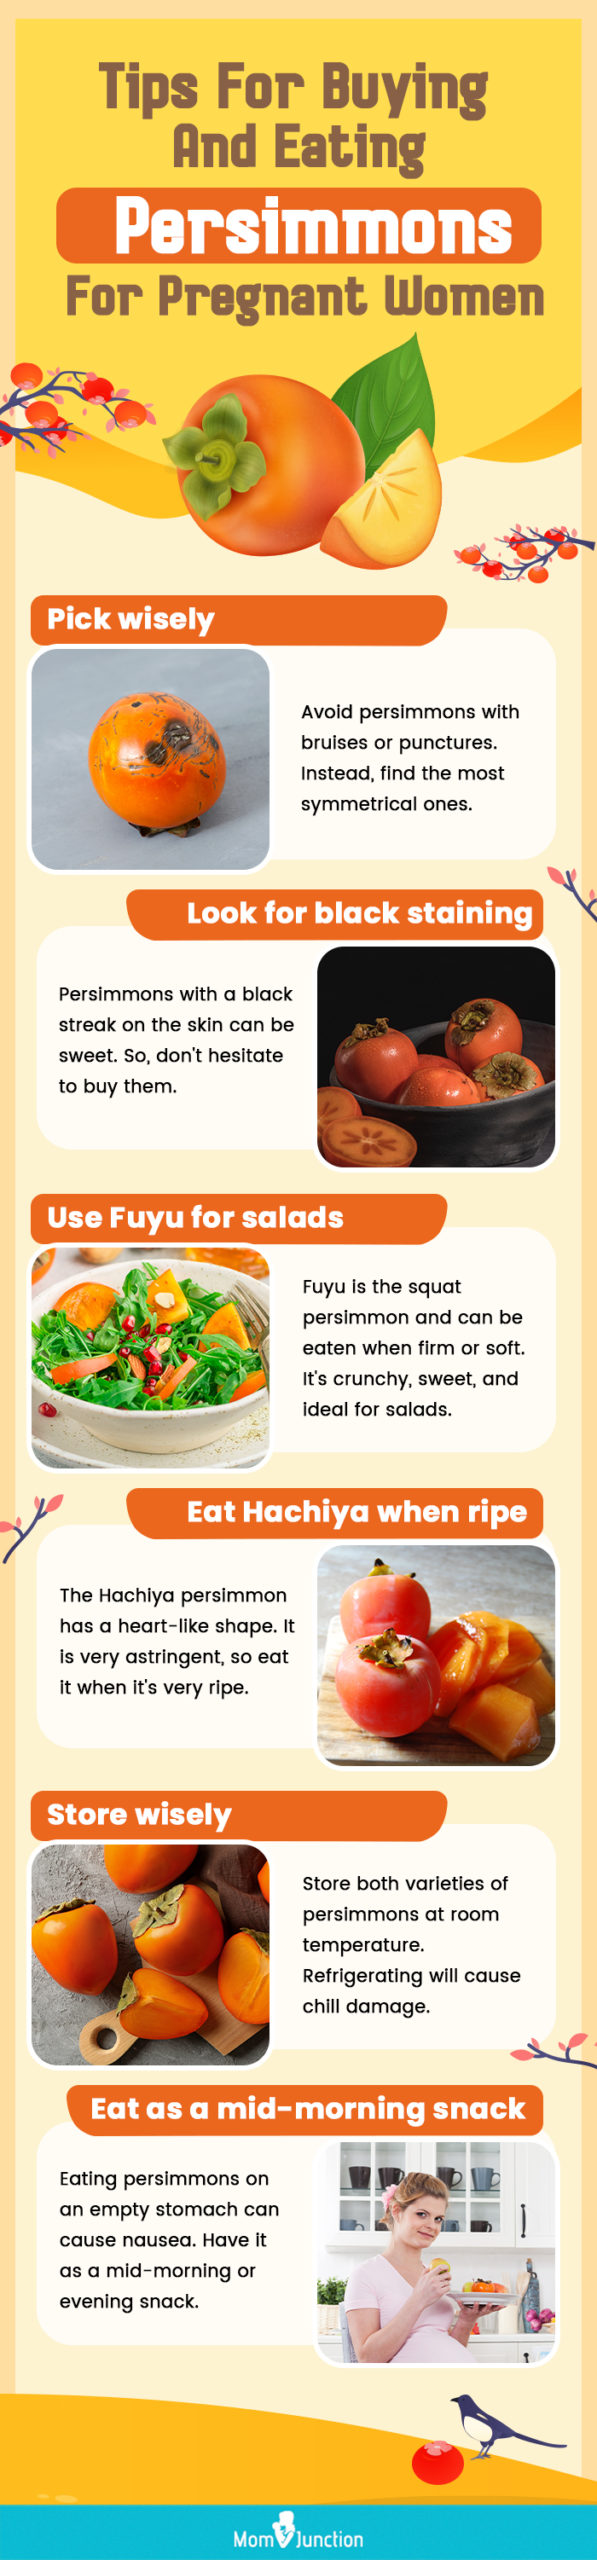 tips for buying and eating persimmons for pregnant women (infographic) 